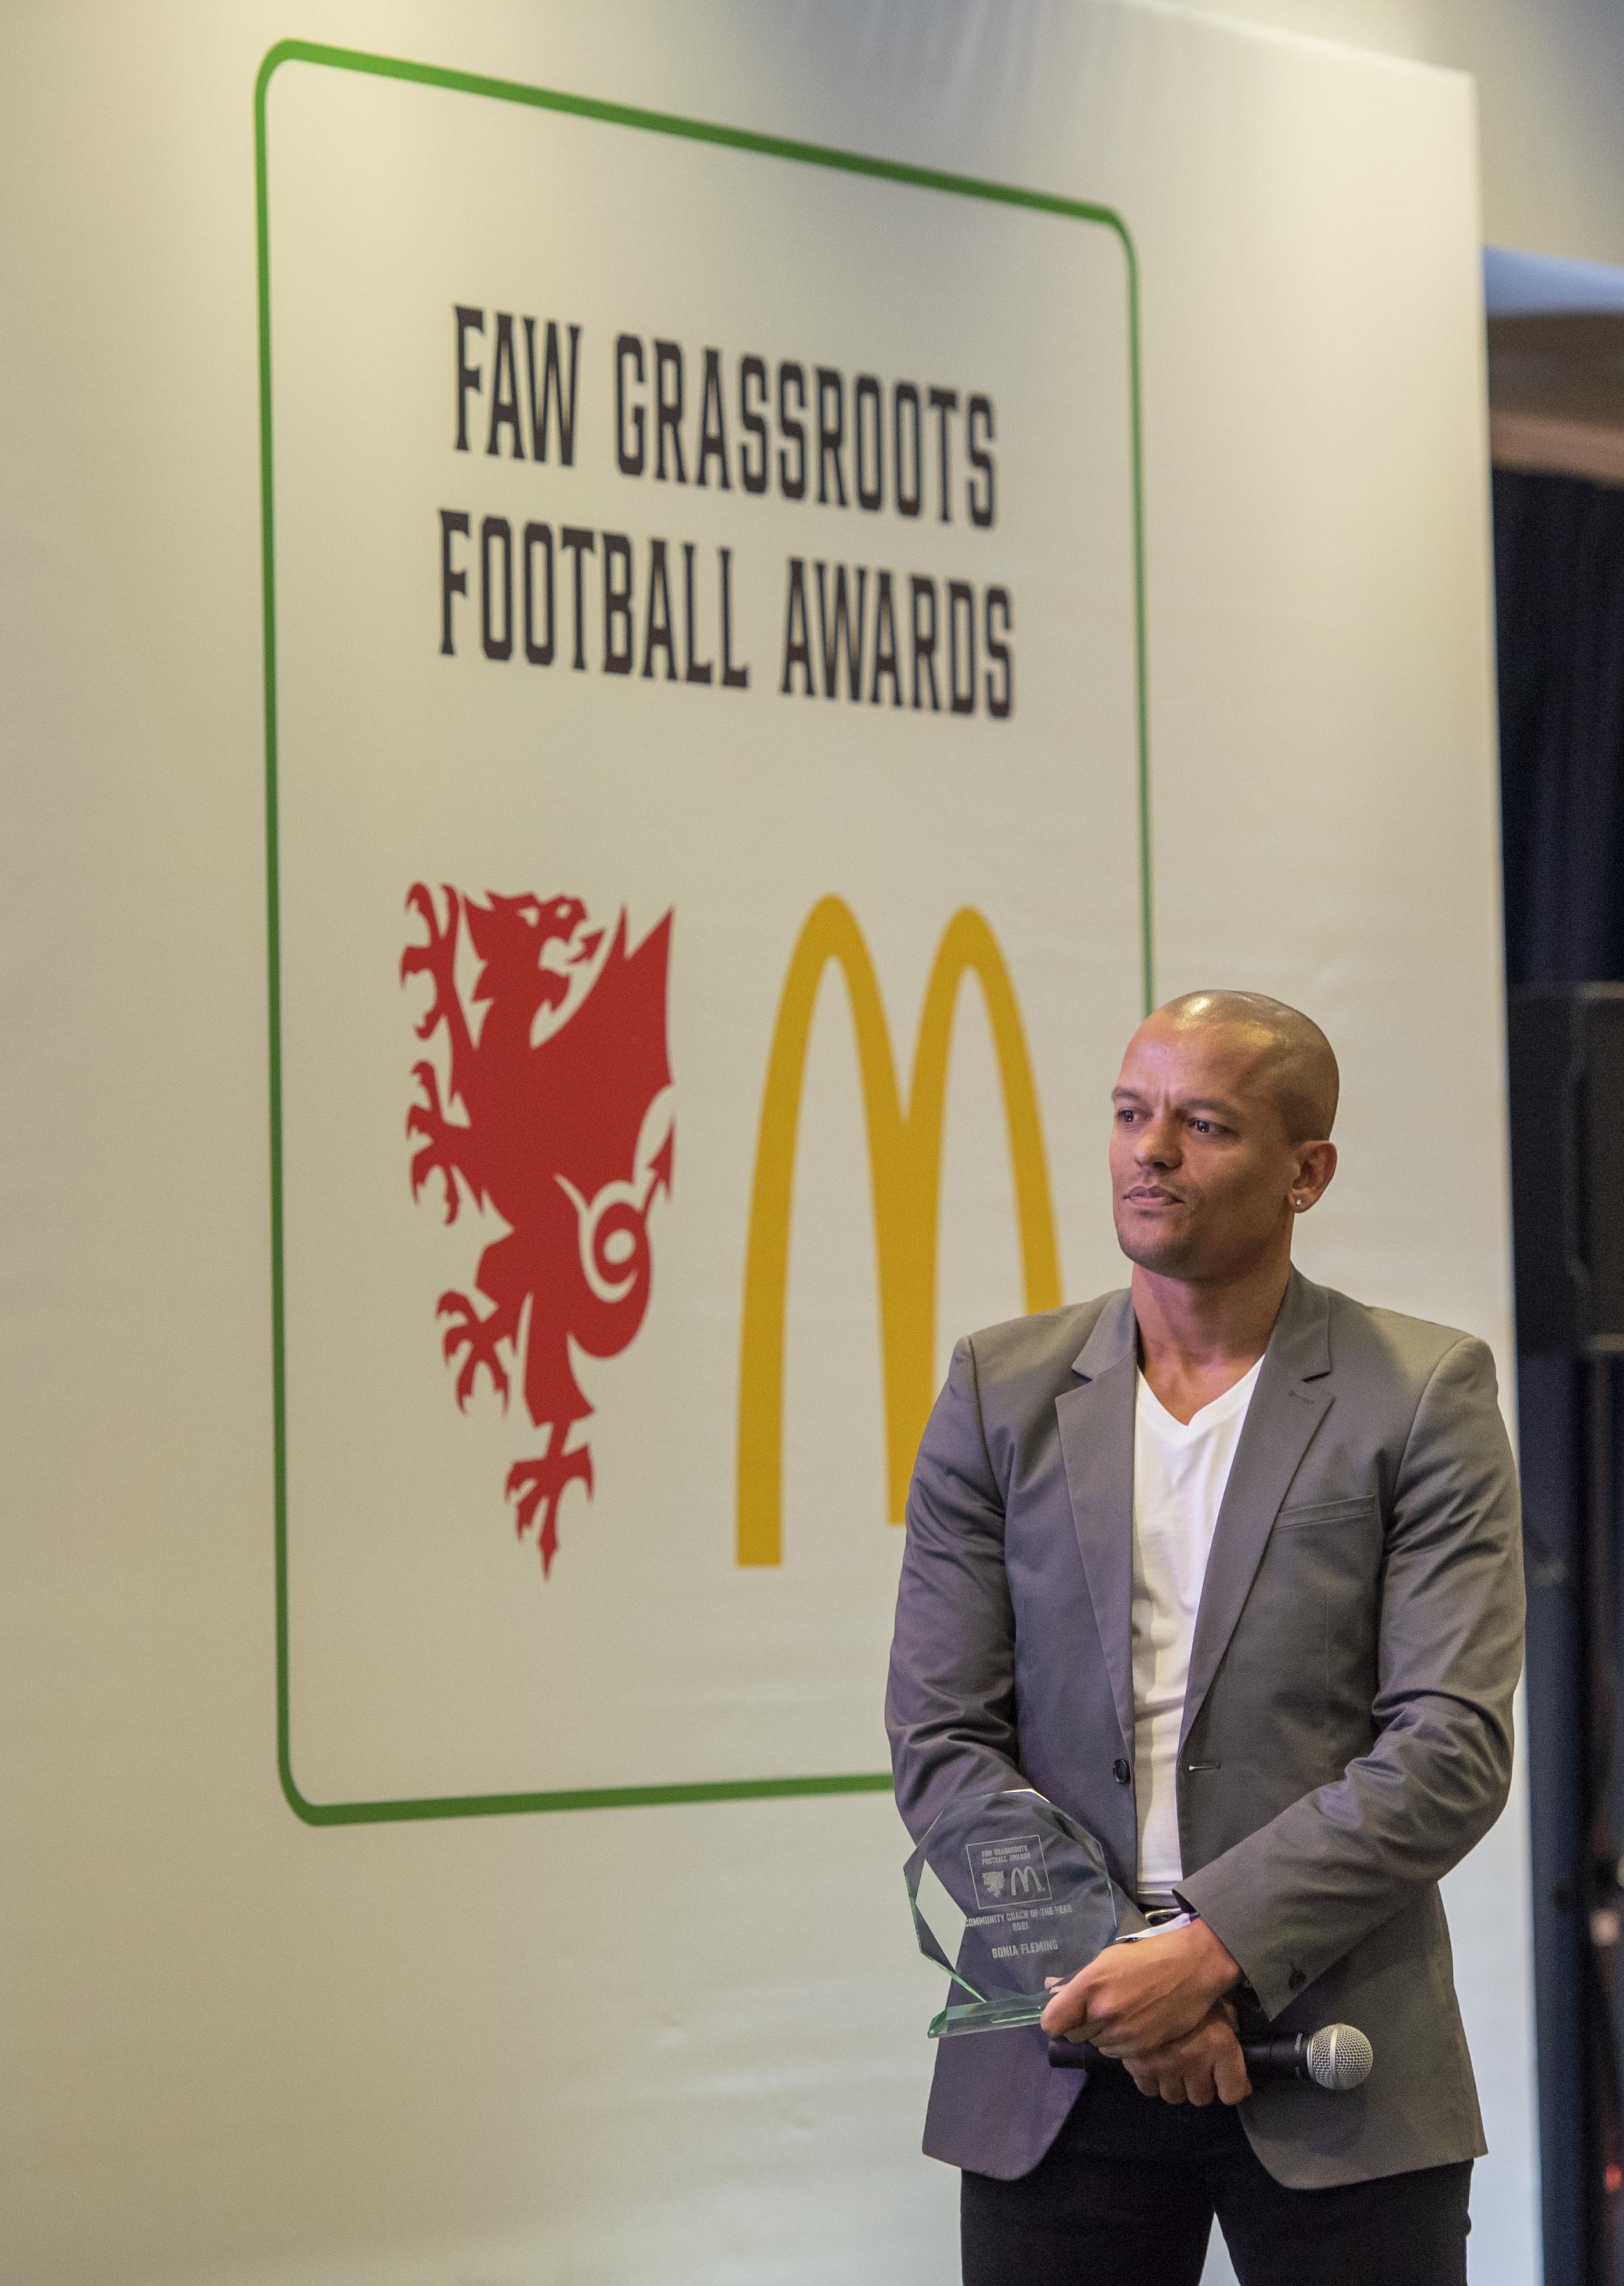 CARDIFF, WALES - 13 NOVEMBER 2021: FAW McDonald’s Grassroots Football Awards 2021 Ceremony ahead of the Wales & Belarus at the Cardiff City Stadium on the 13th of November 2021. (Pic by Andrew Dowling/FAW)